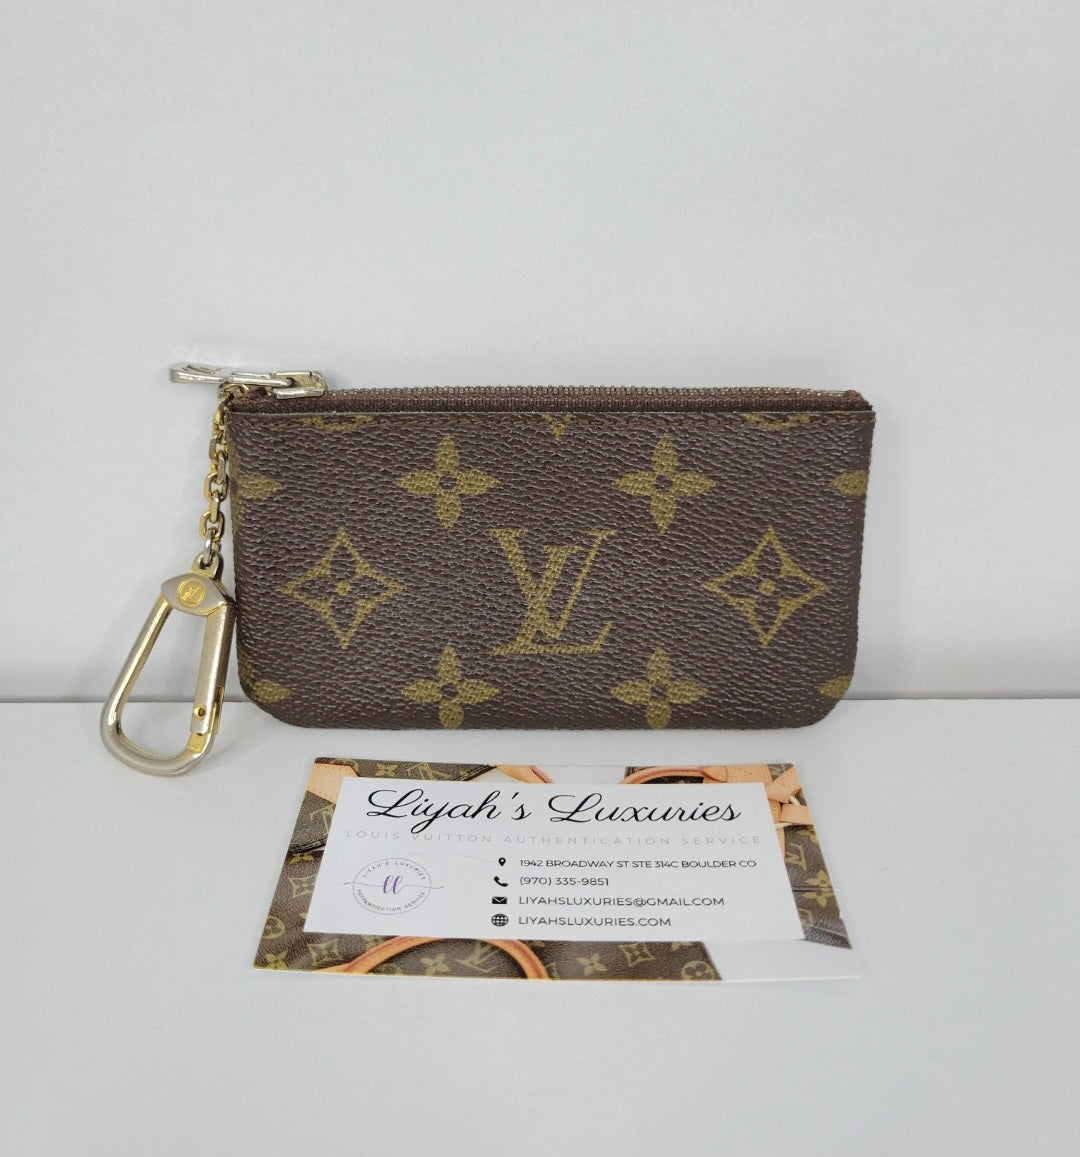 Is The Louis Vuitton Key Pouch Worth It?